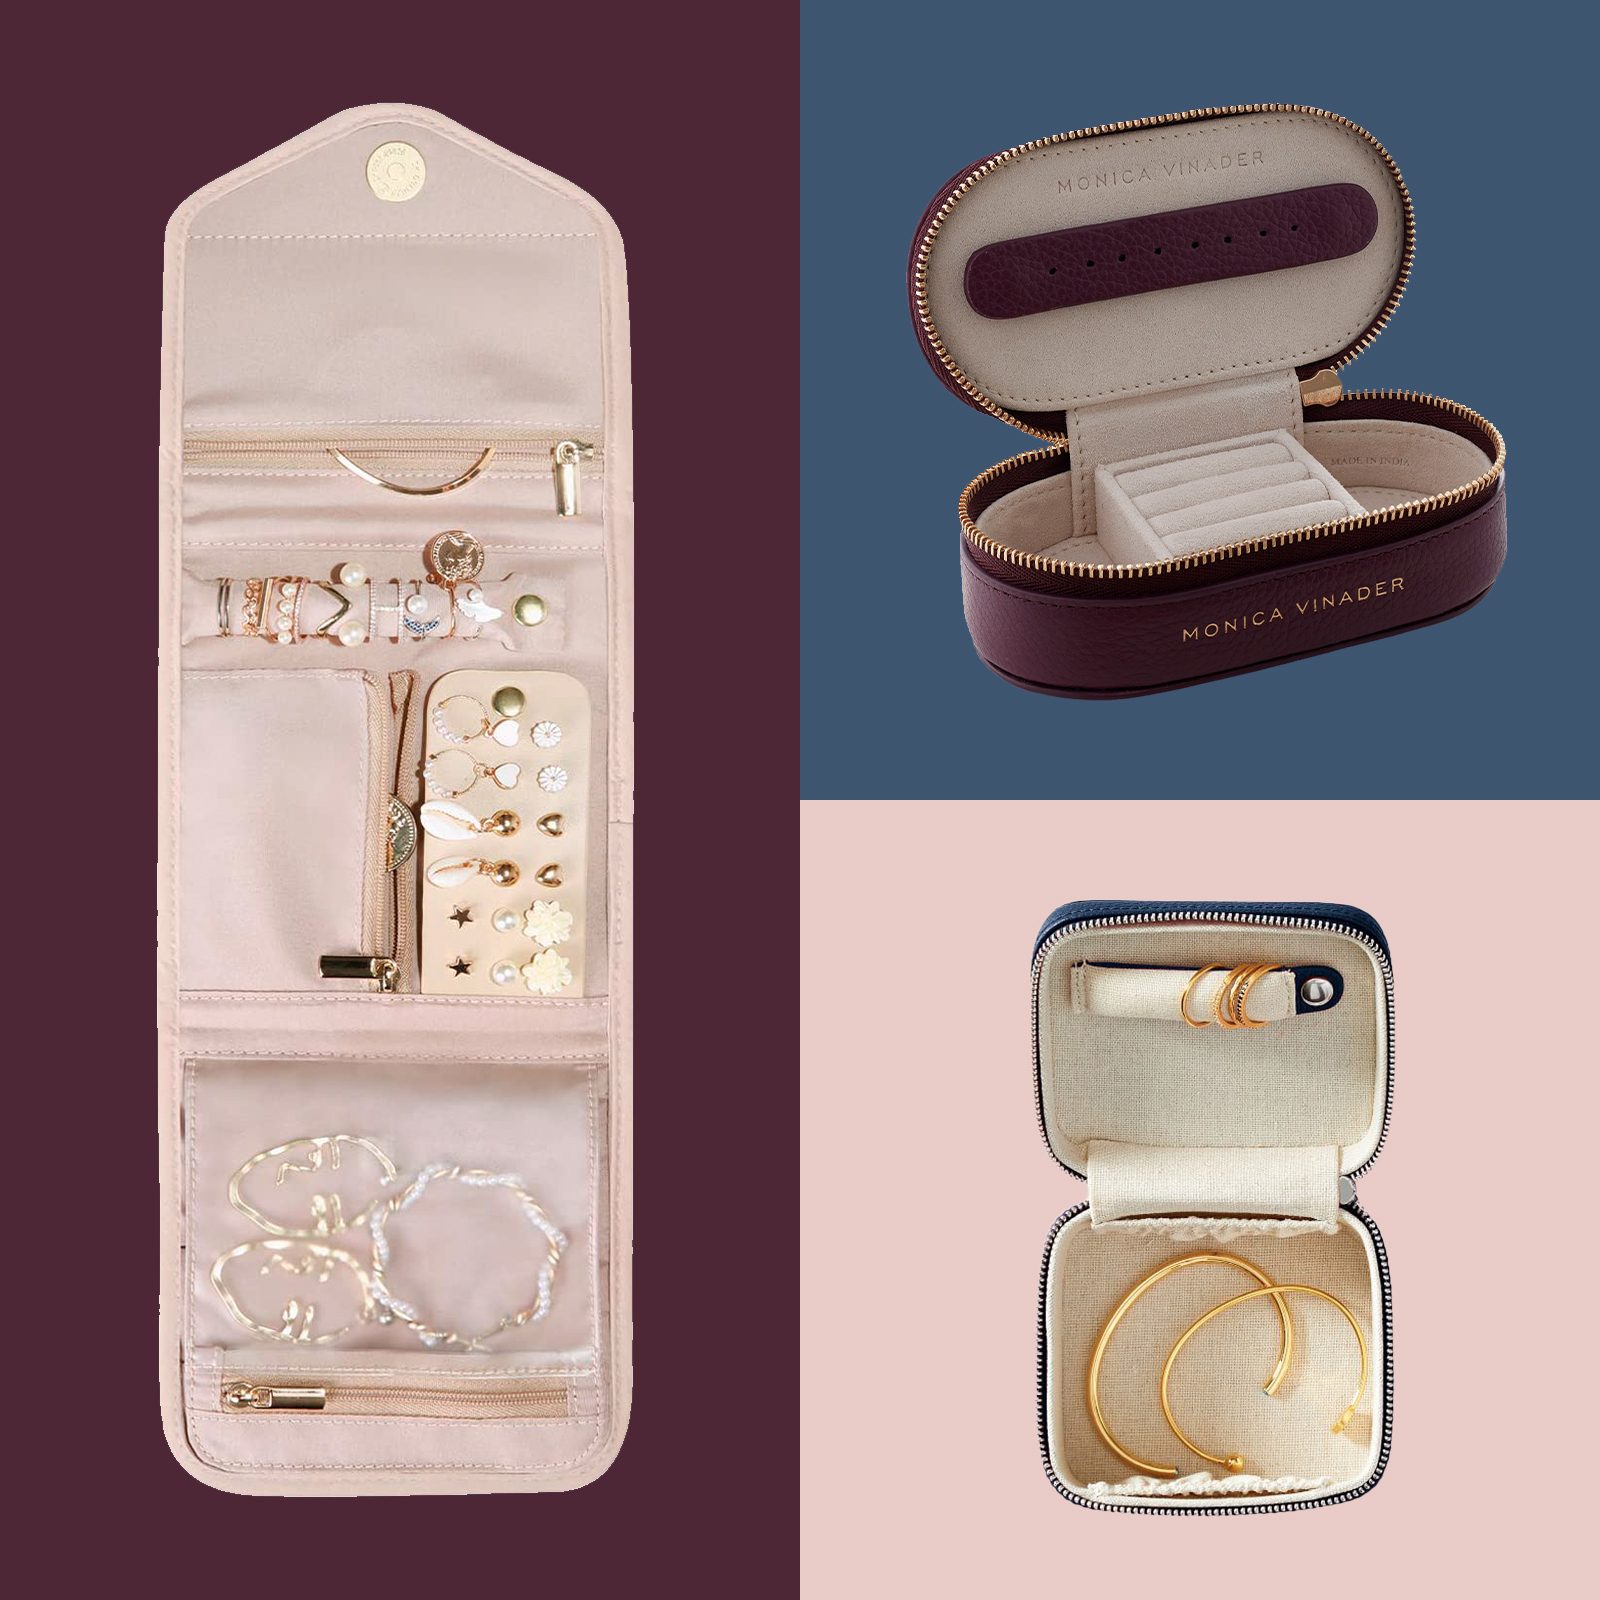 Stackers Travel Jewelry Case